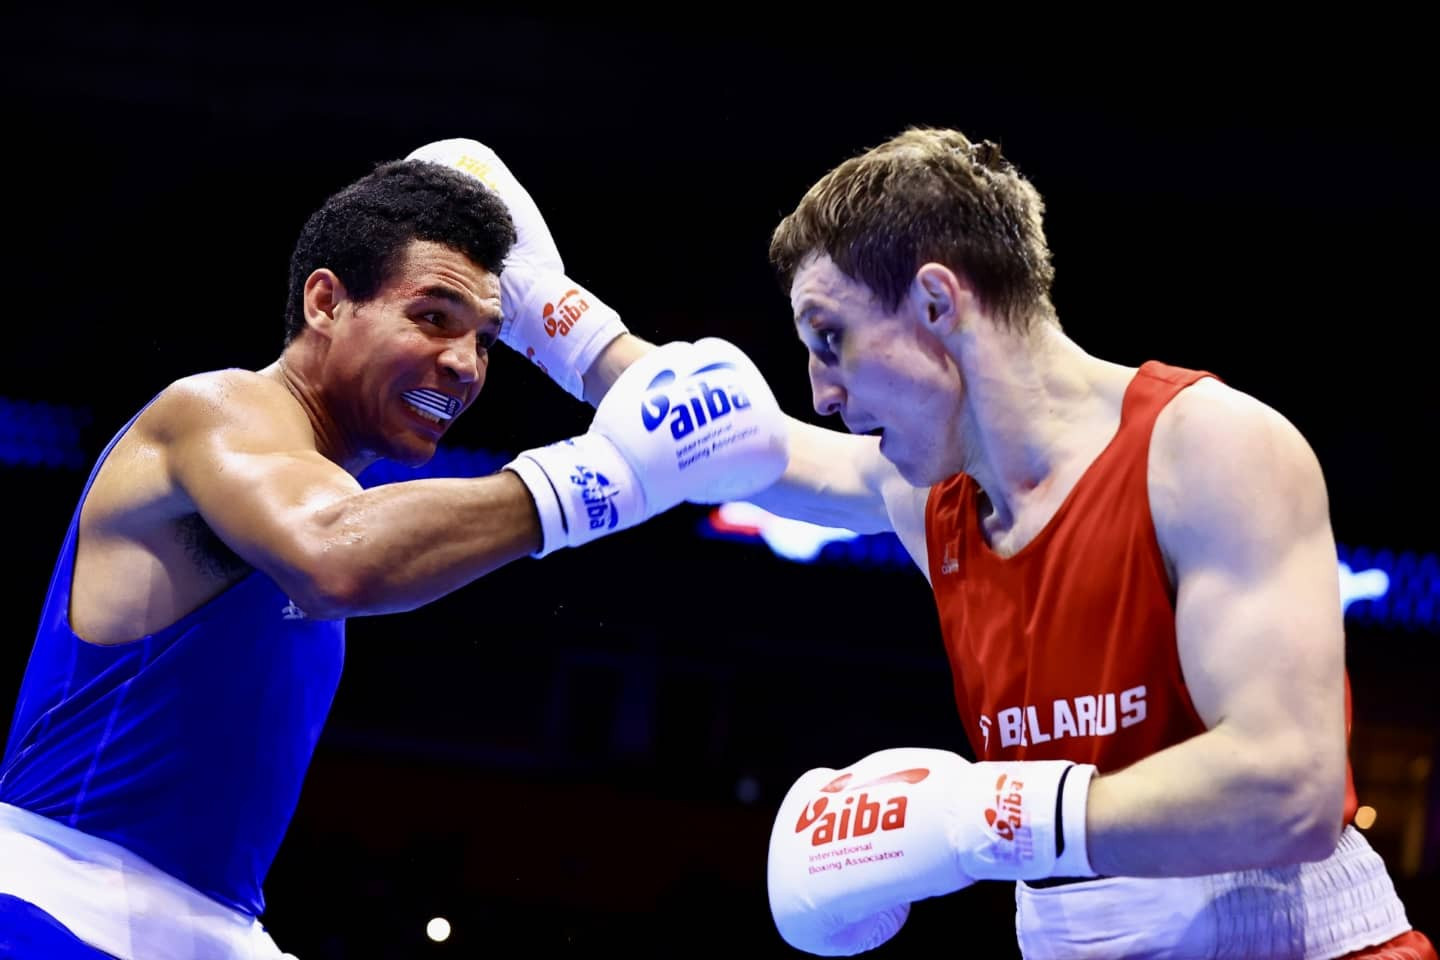 Rahim Gonzales controversially defeated Aliaksei Alfiorau in the under-80kg final ©AIBA